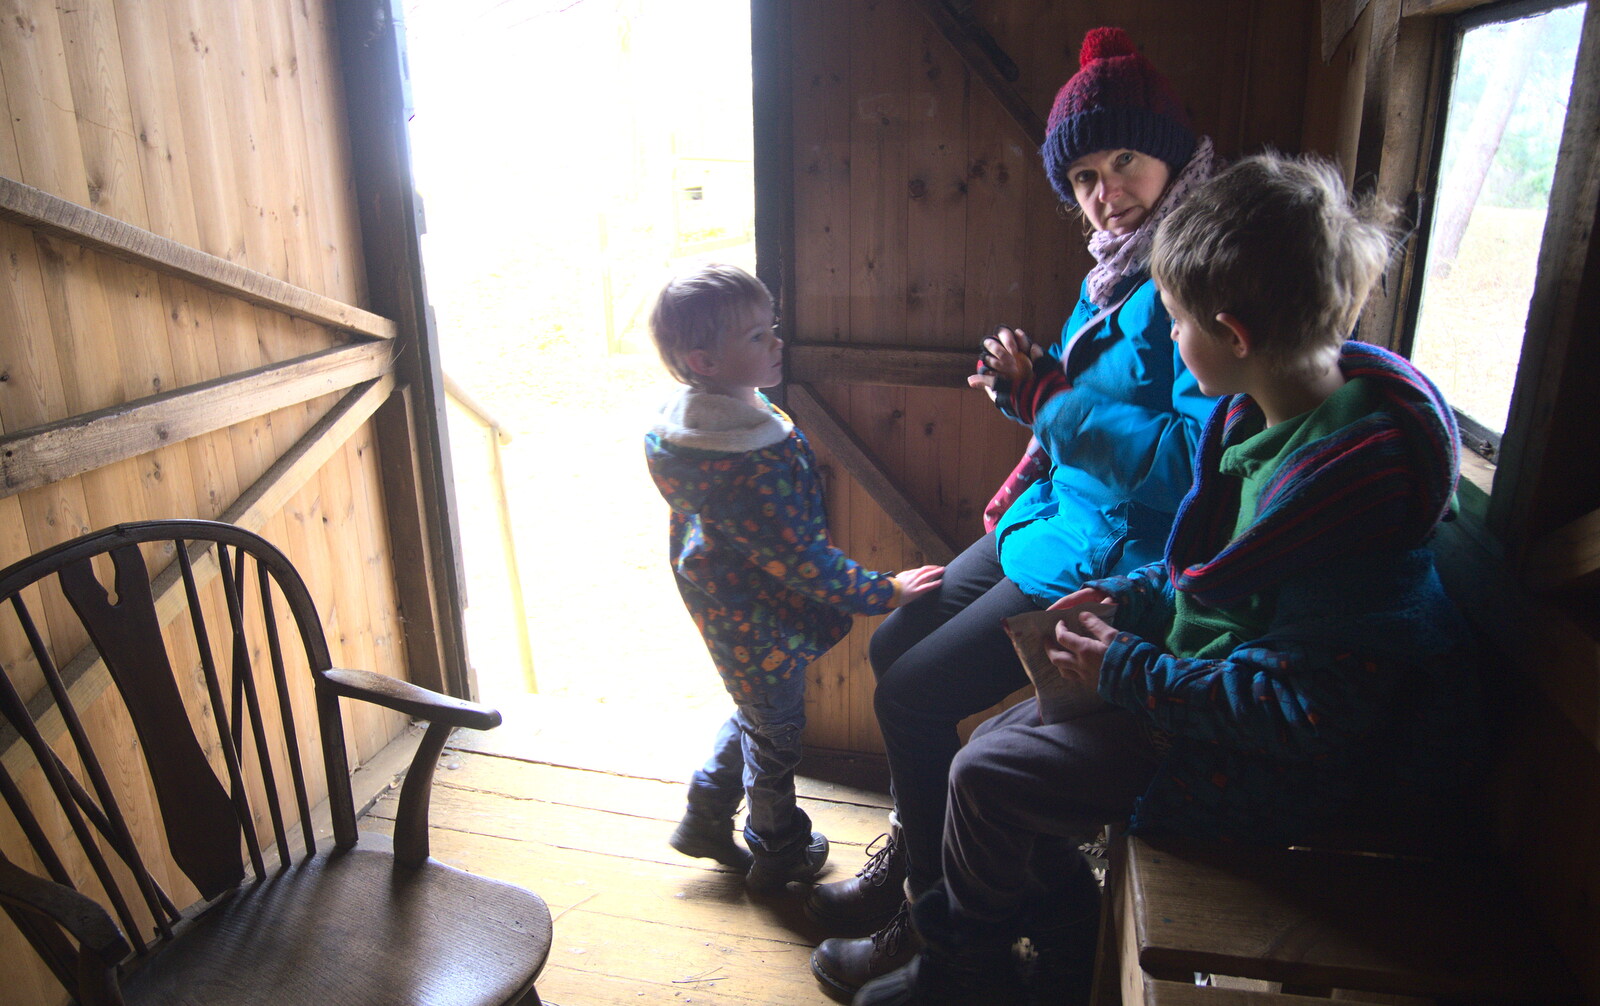 We stop for a snack in a shed from A Trip to Sutton Hoo, Woodbridge, Suffolk - 29th January 2017